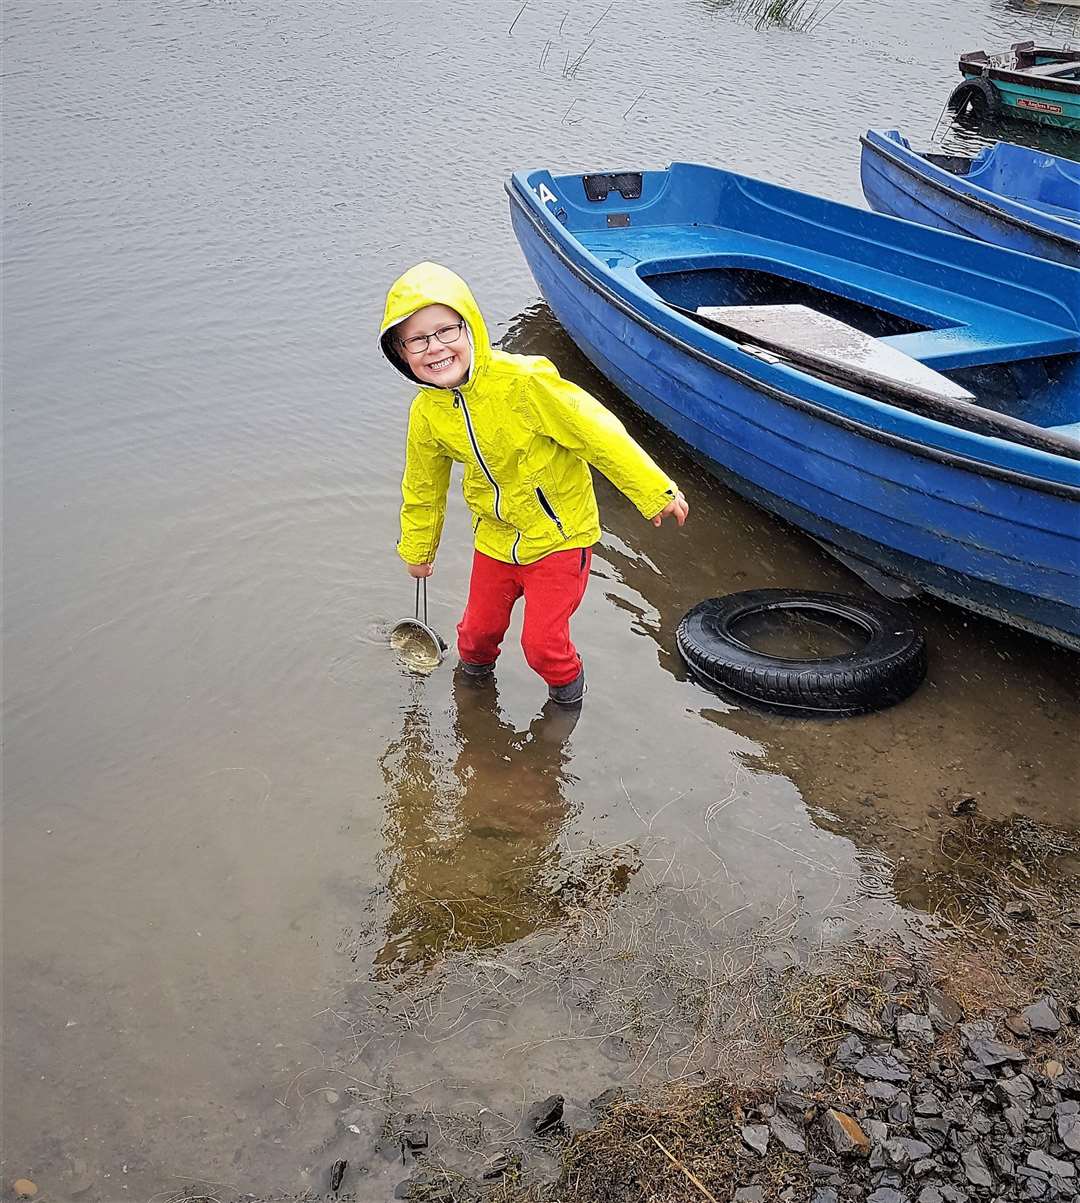 Jordan 'panning for gold' in St John’s Loch, Dunnet. His mother says he loves the water. Picture: Estie Broughton